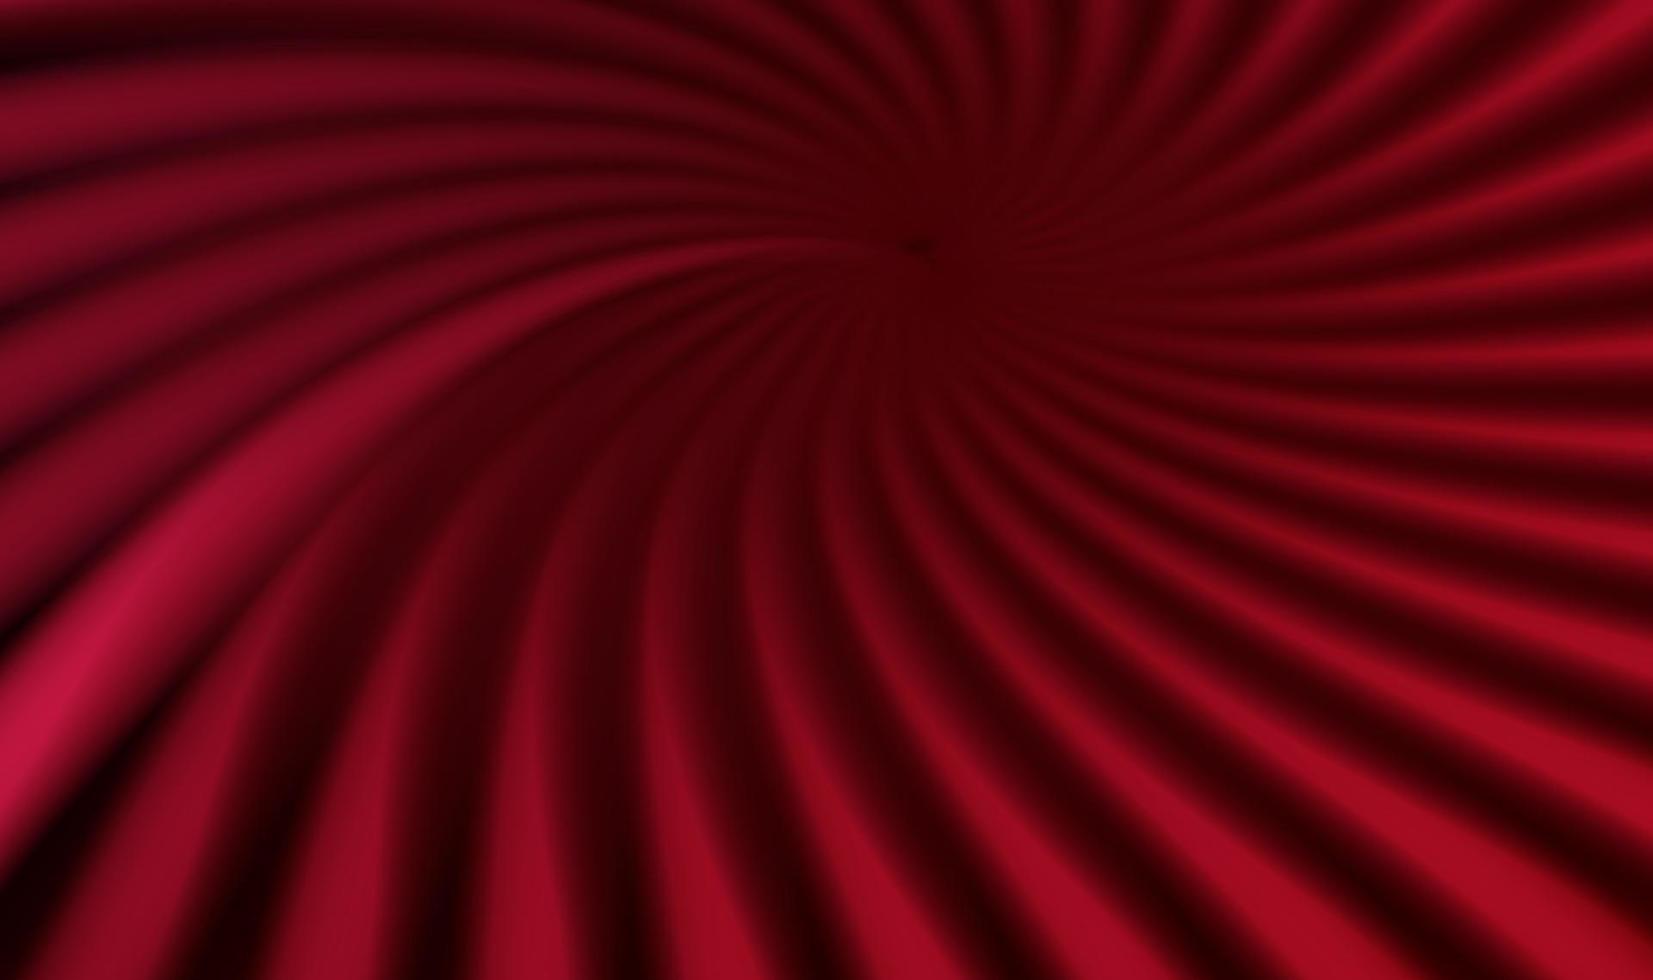 Abstract light red silk smooth fabric background vector